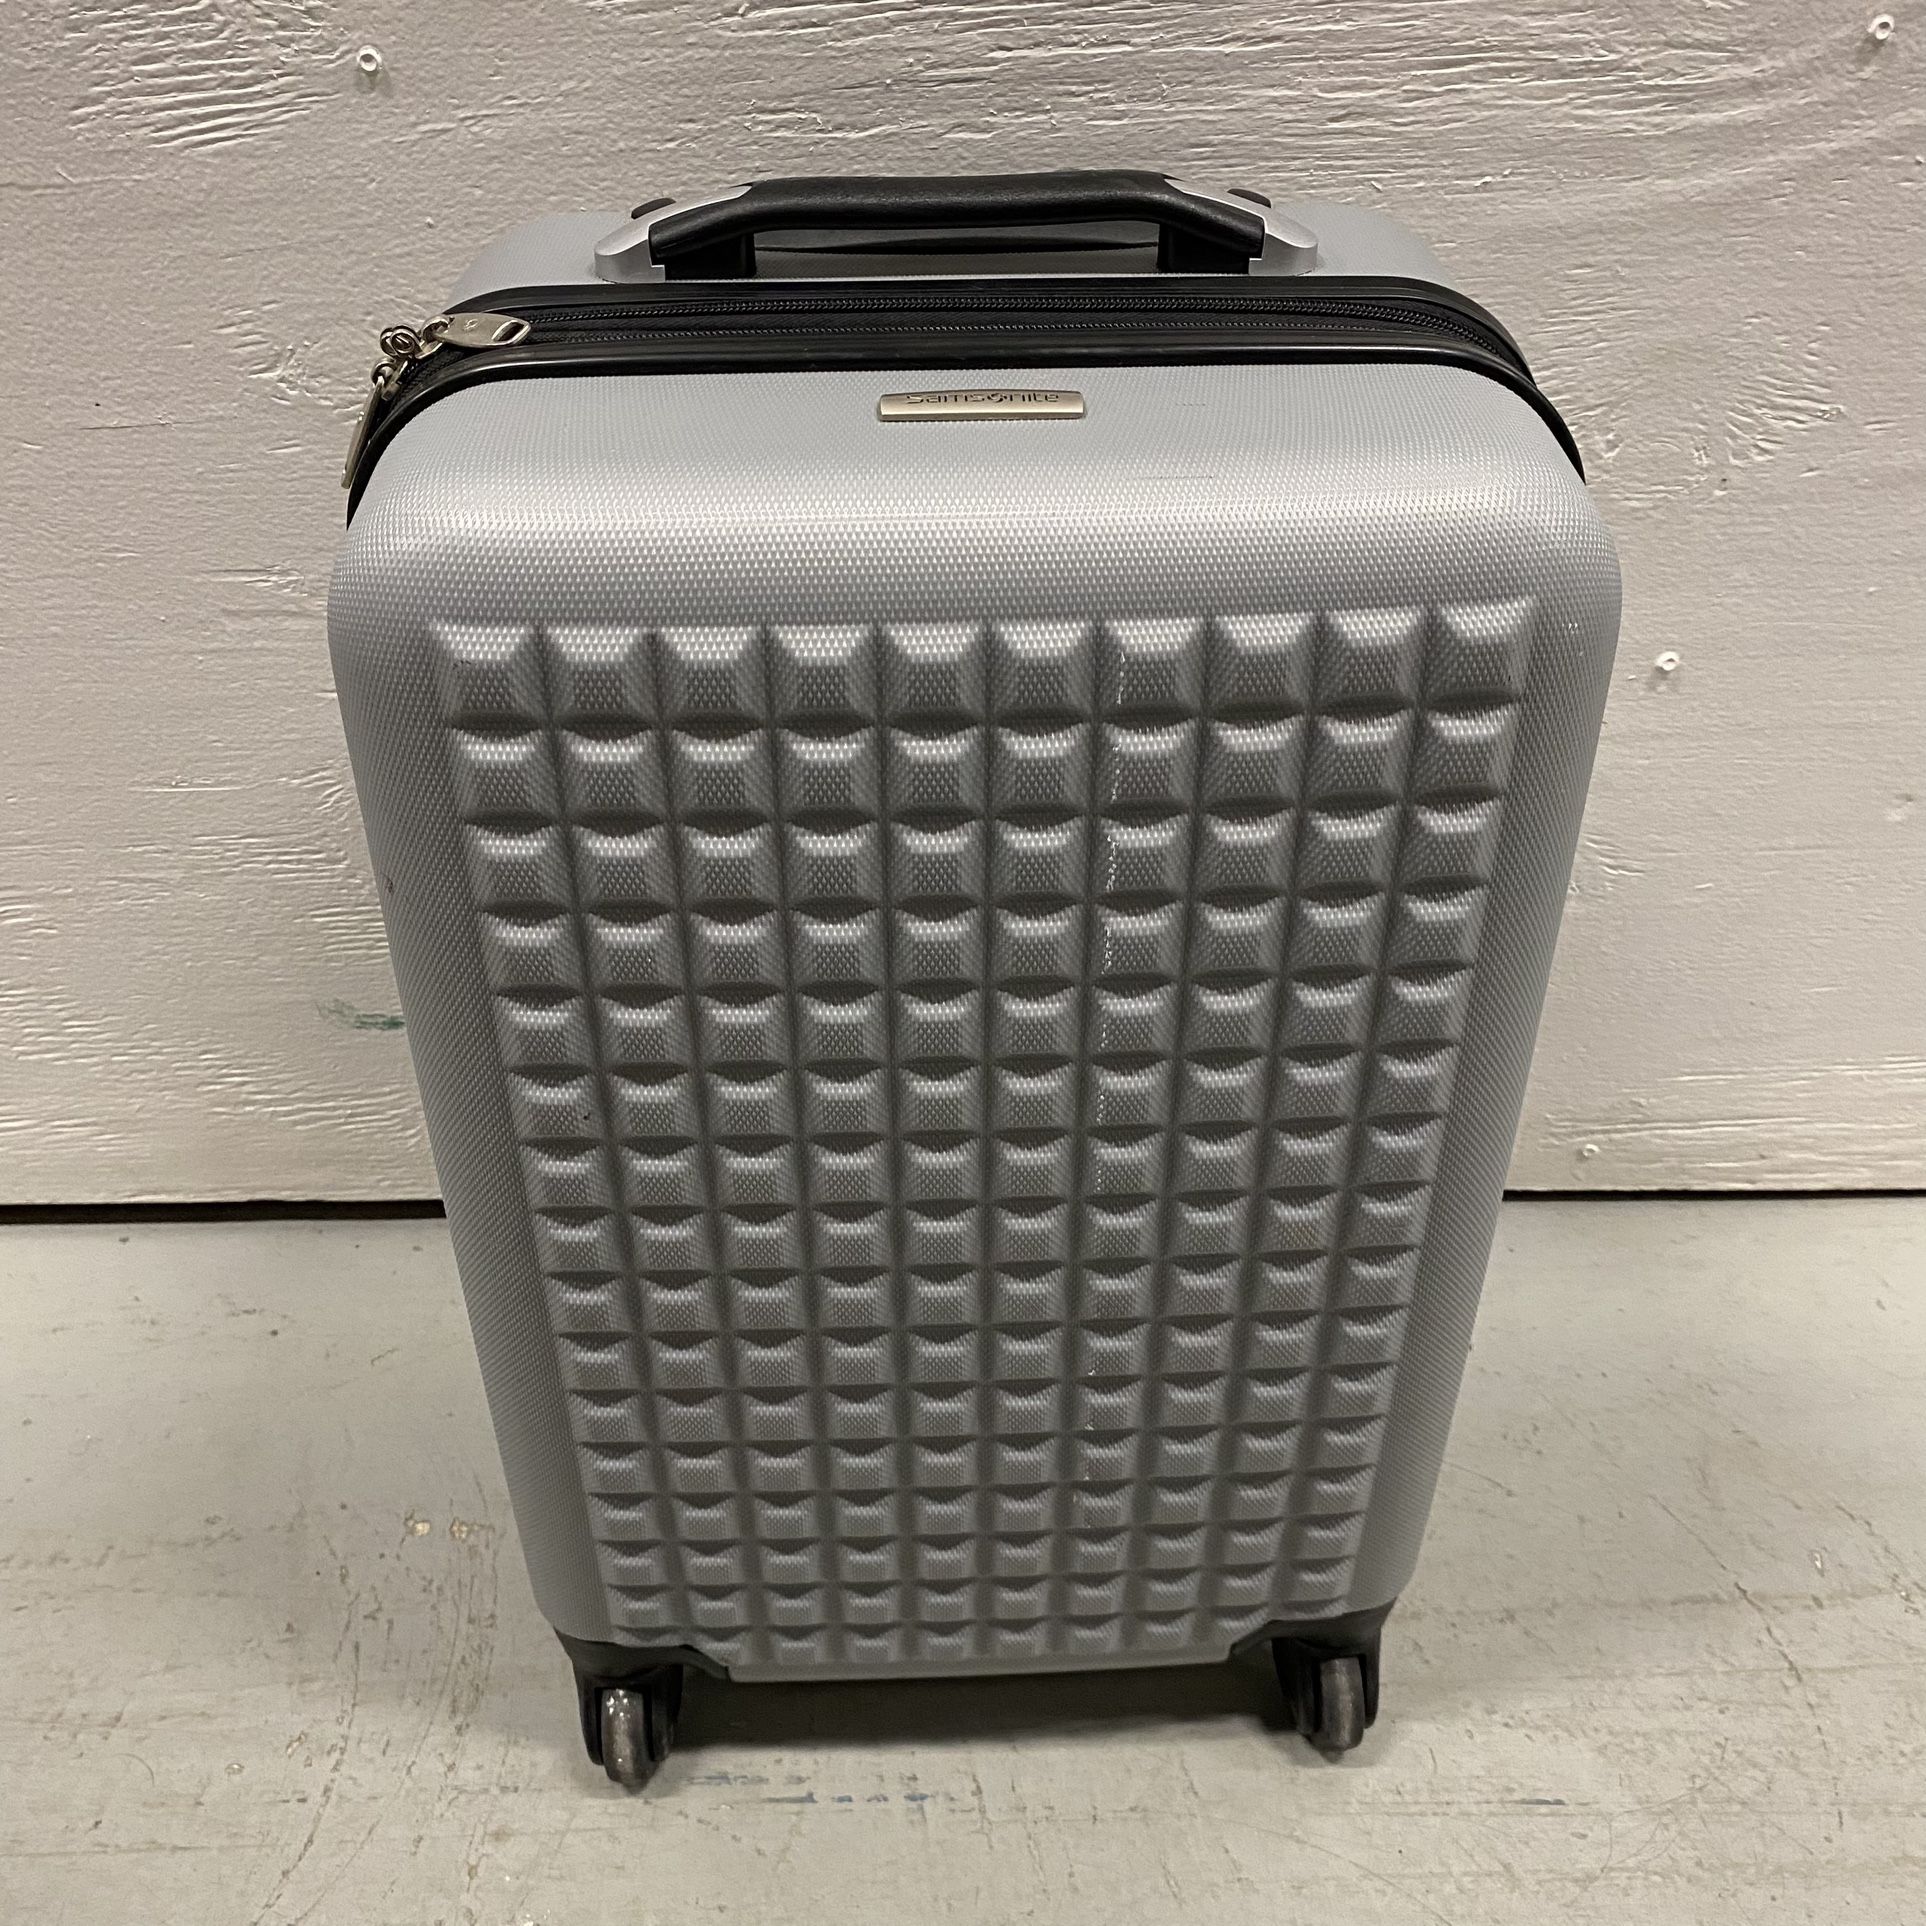 Samsonite Light Gray Hard Shell 4-Wheel Spinner with Black accents Carry-on Suitcase Travel Bag Luggage